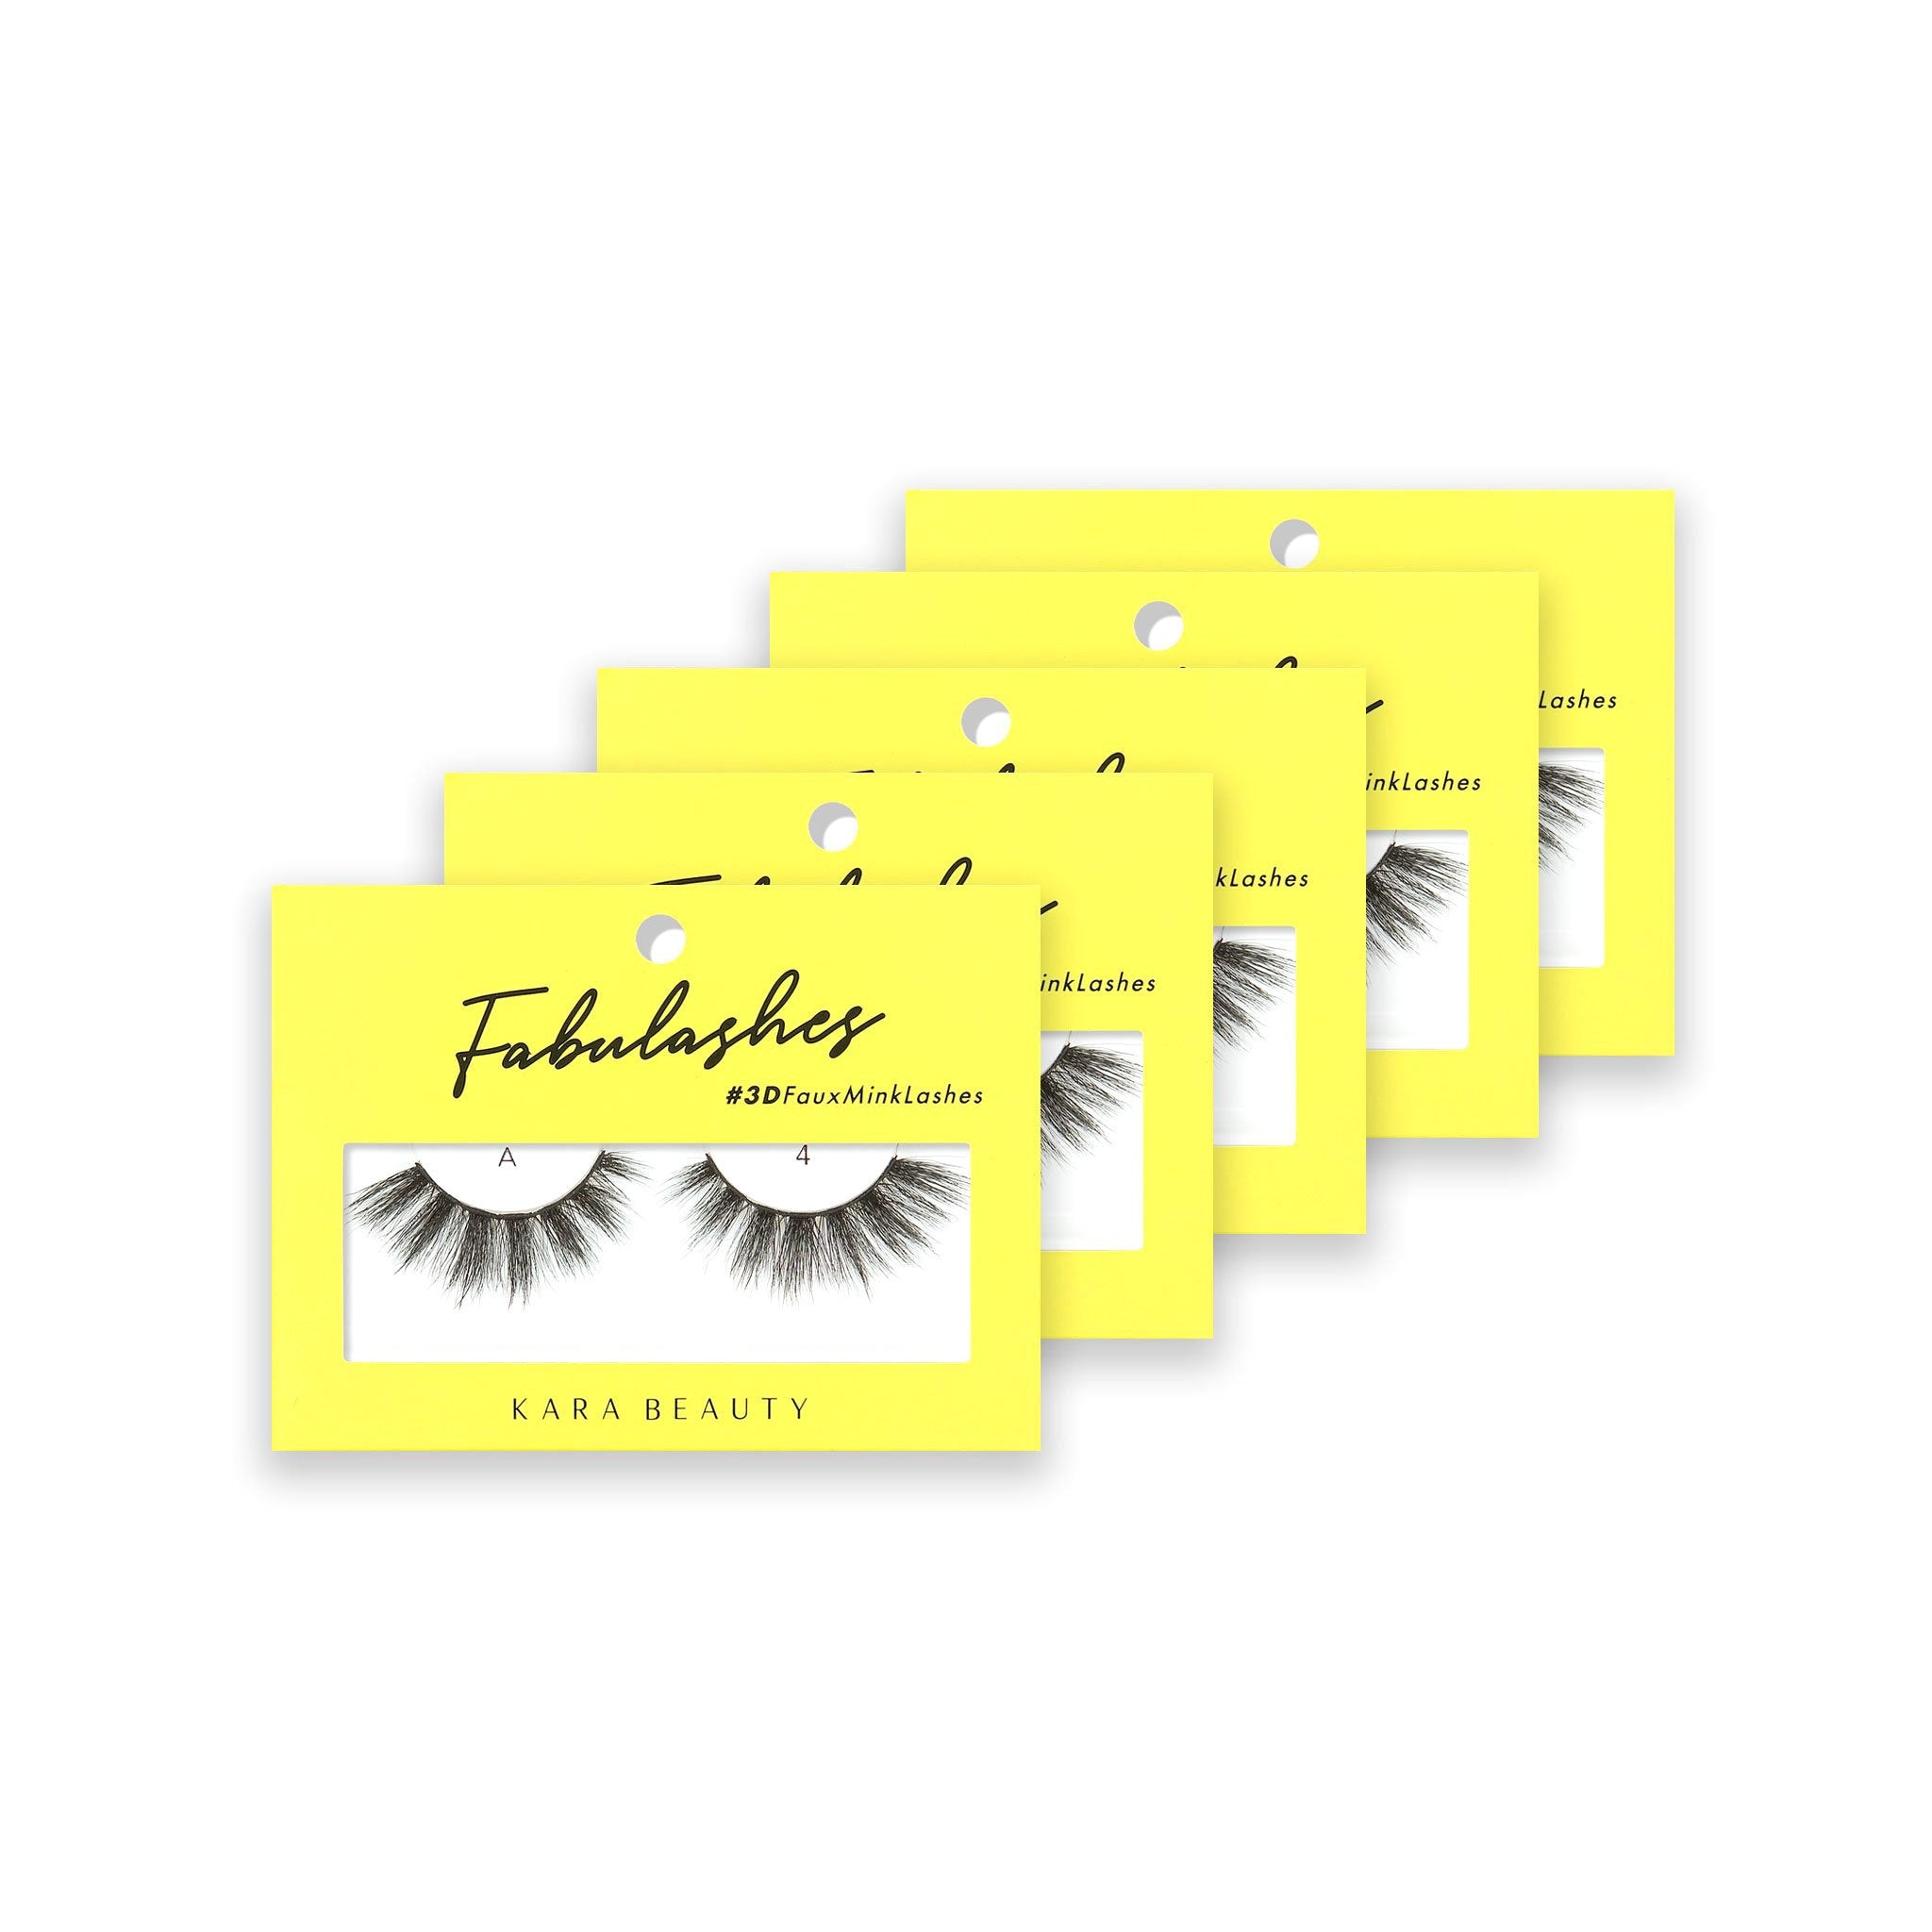 Style A4 Fabulashes 3D faux mink strip eyelashes 5 pack